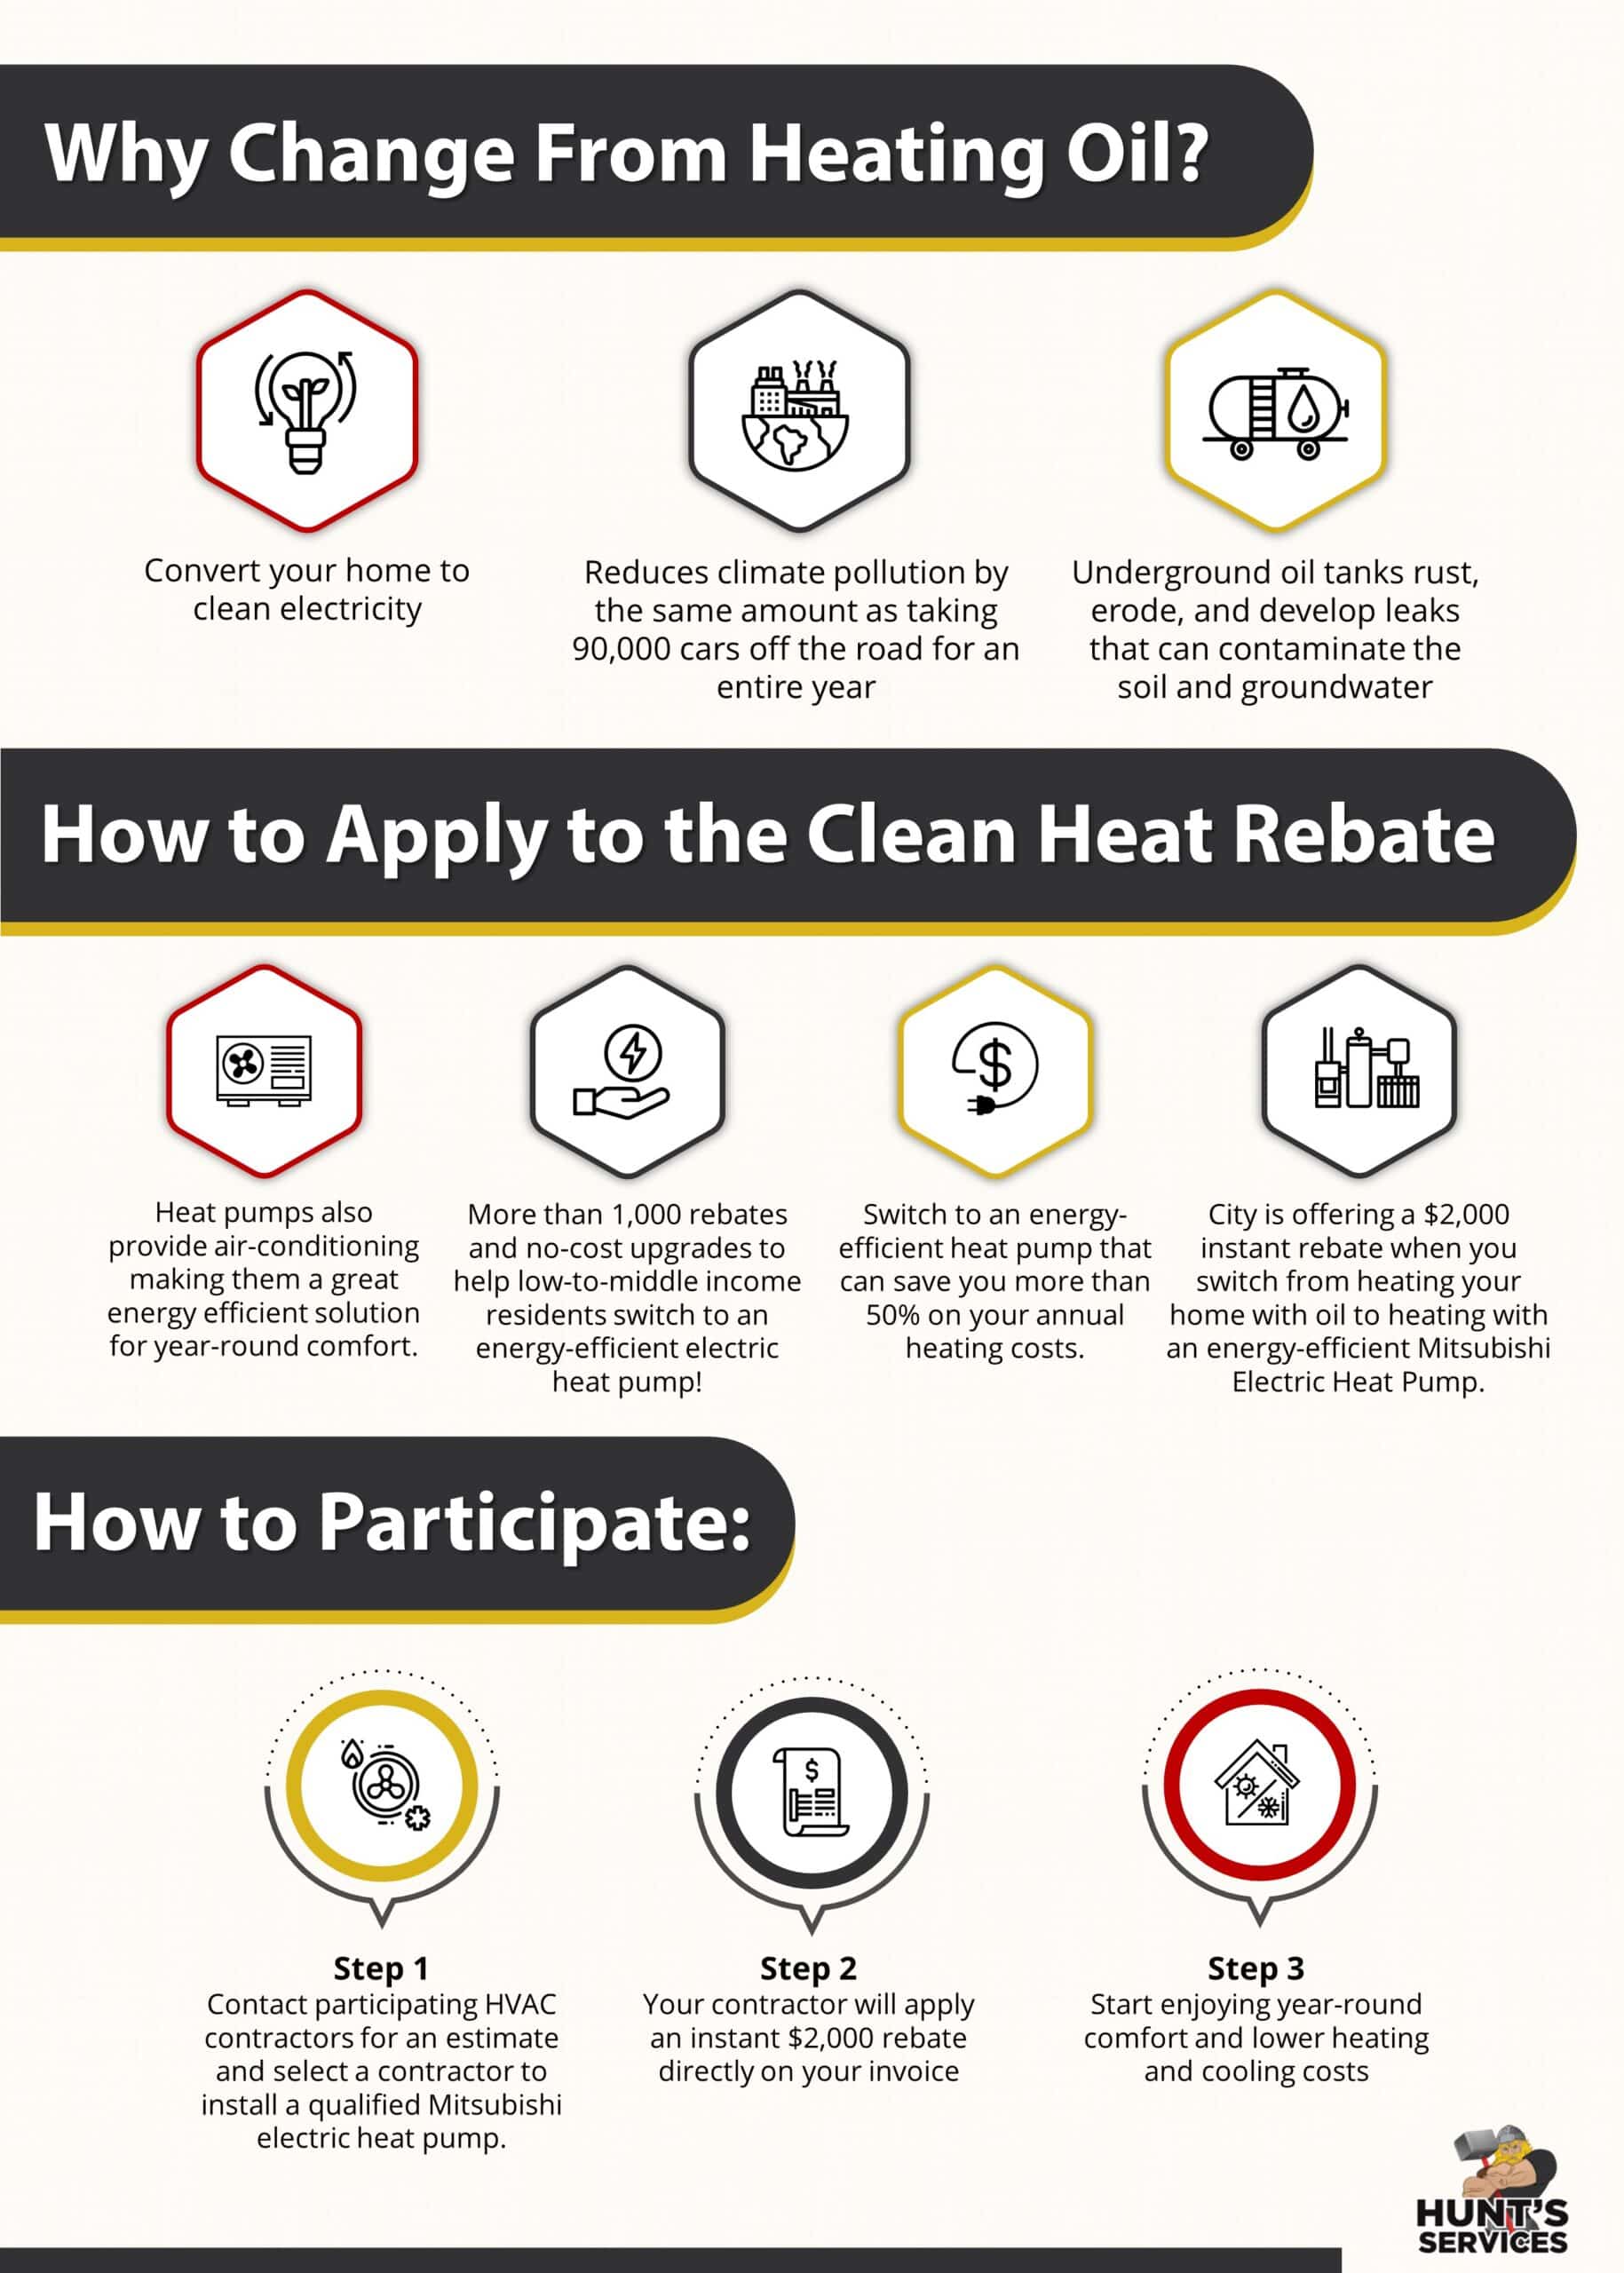 Infographic showing how to apply for New Incentives to Make Heat Pumps More Affordable For Washington Residents